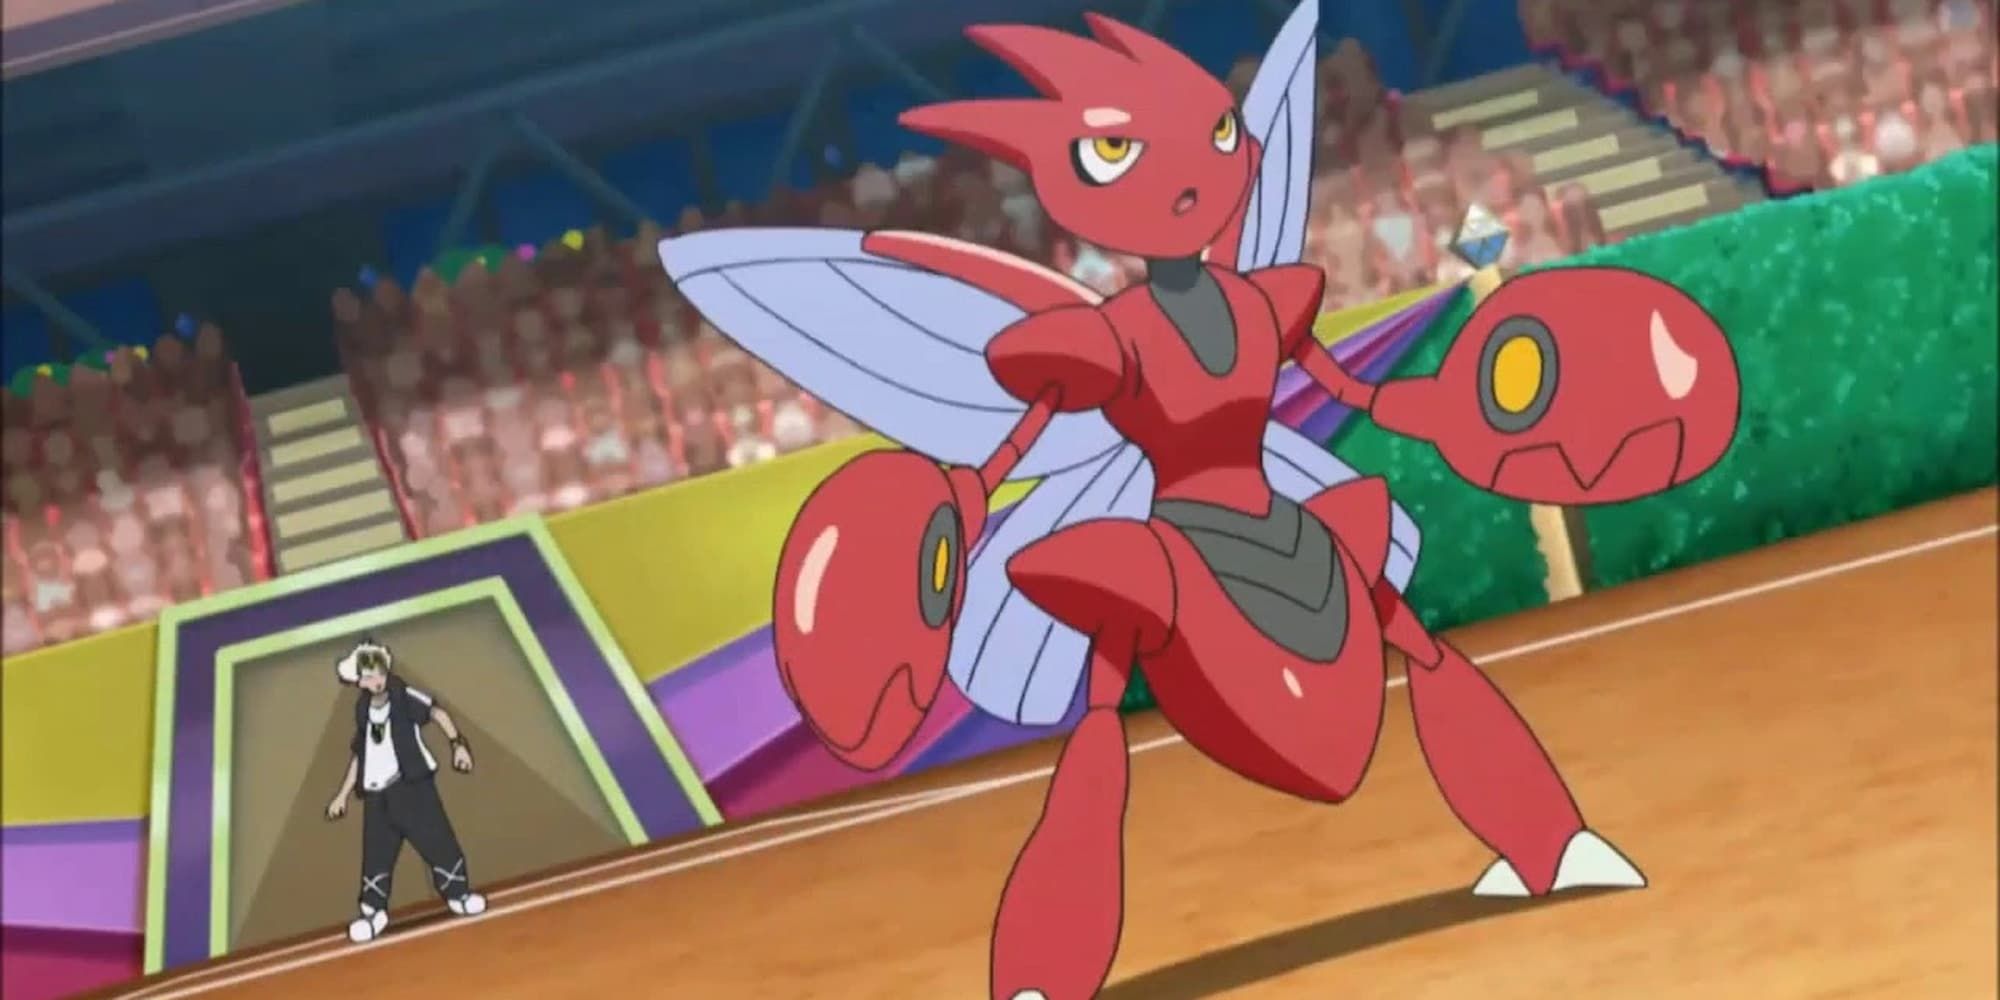 Scizor looks up cautiously as it awaits to begin battle on the field in Pokemon.